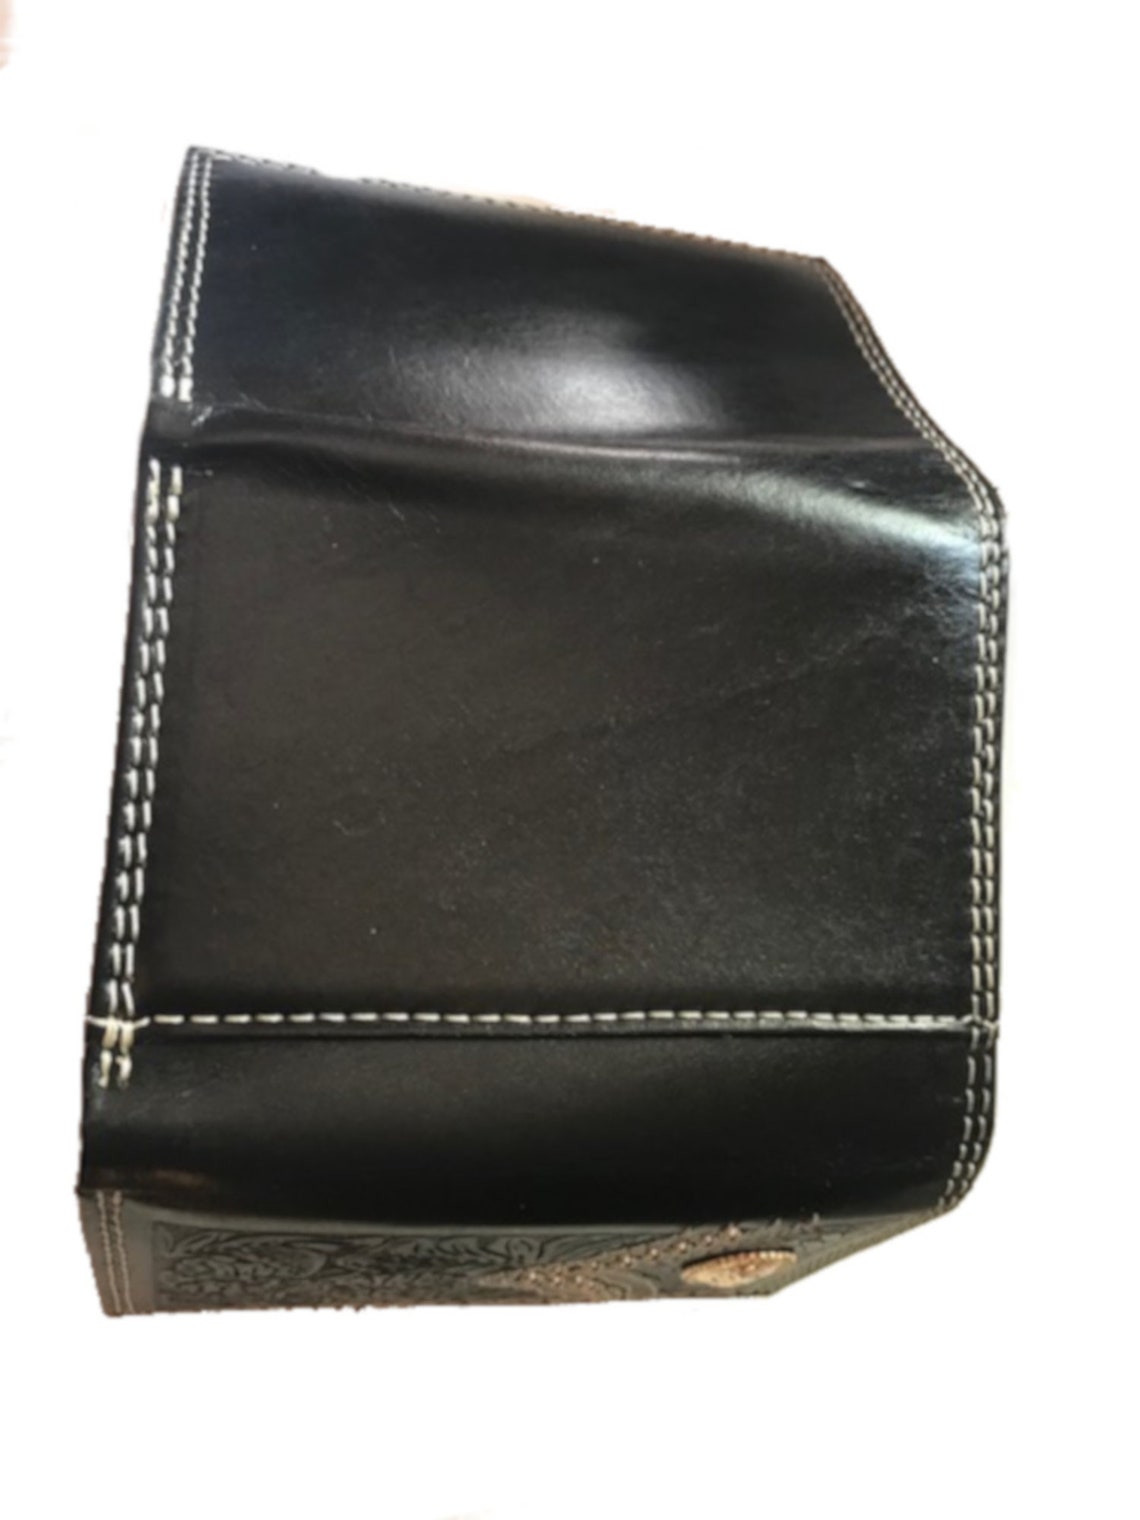 Nocona Western Mens Wallet Leather Trifold Embossed Studs Oval - Etsy